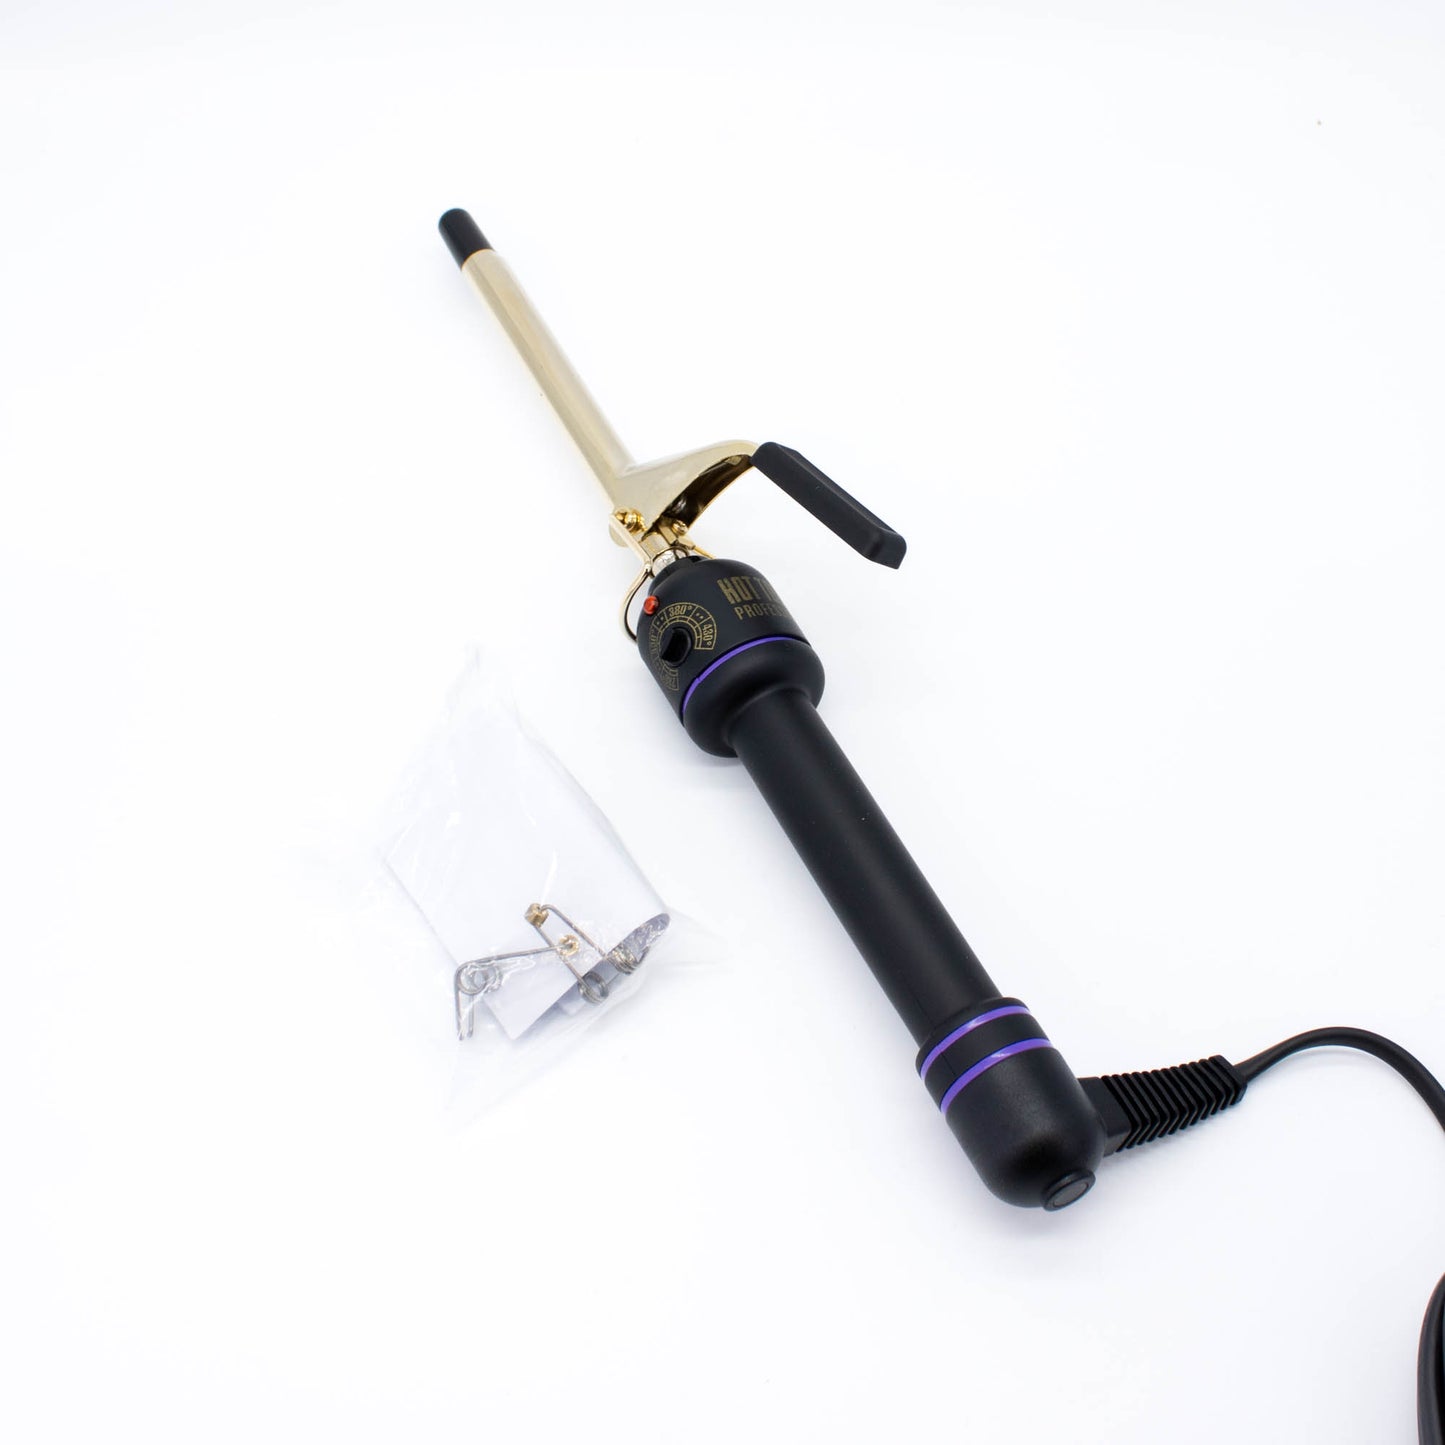 HOT TOOLS 1/2" 24k Curling Iron/Wand - Imperfect Box